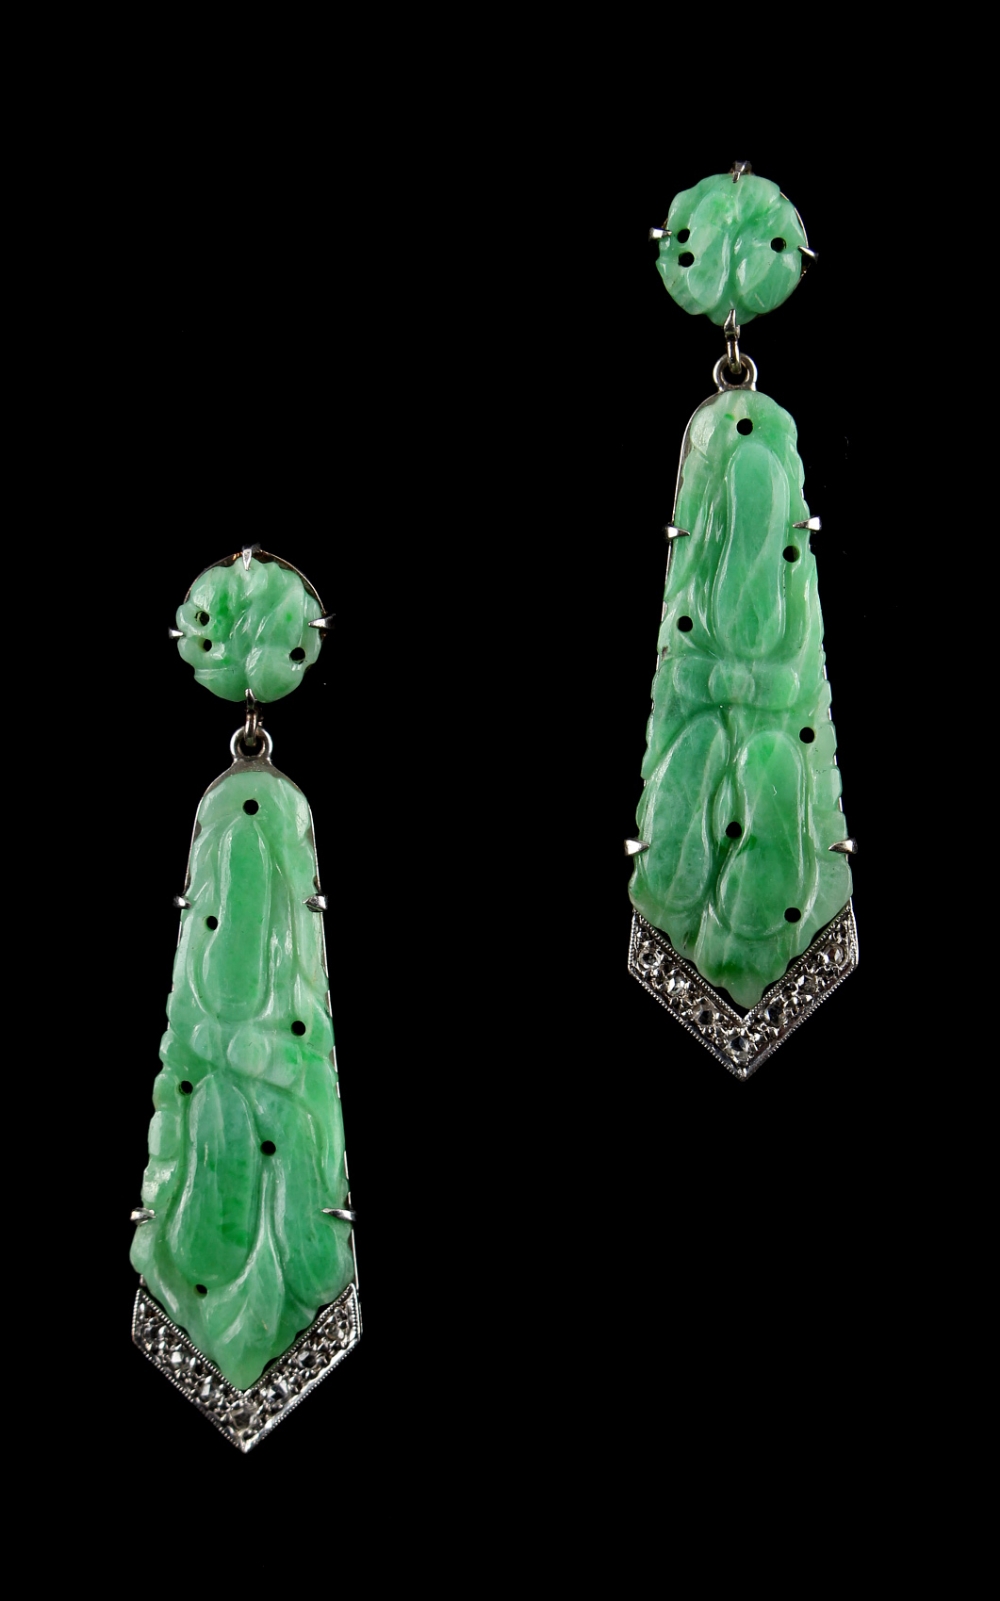 A pair of Art Deco style unmarked white gold or platinum & carved jadeite pendant earrings, with